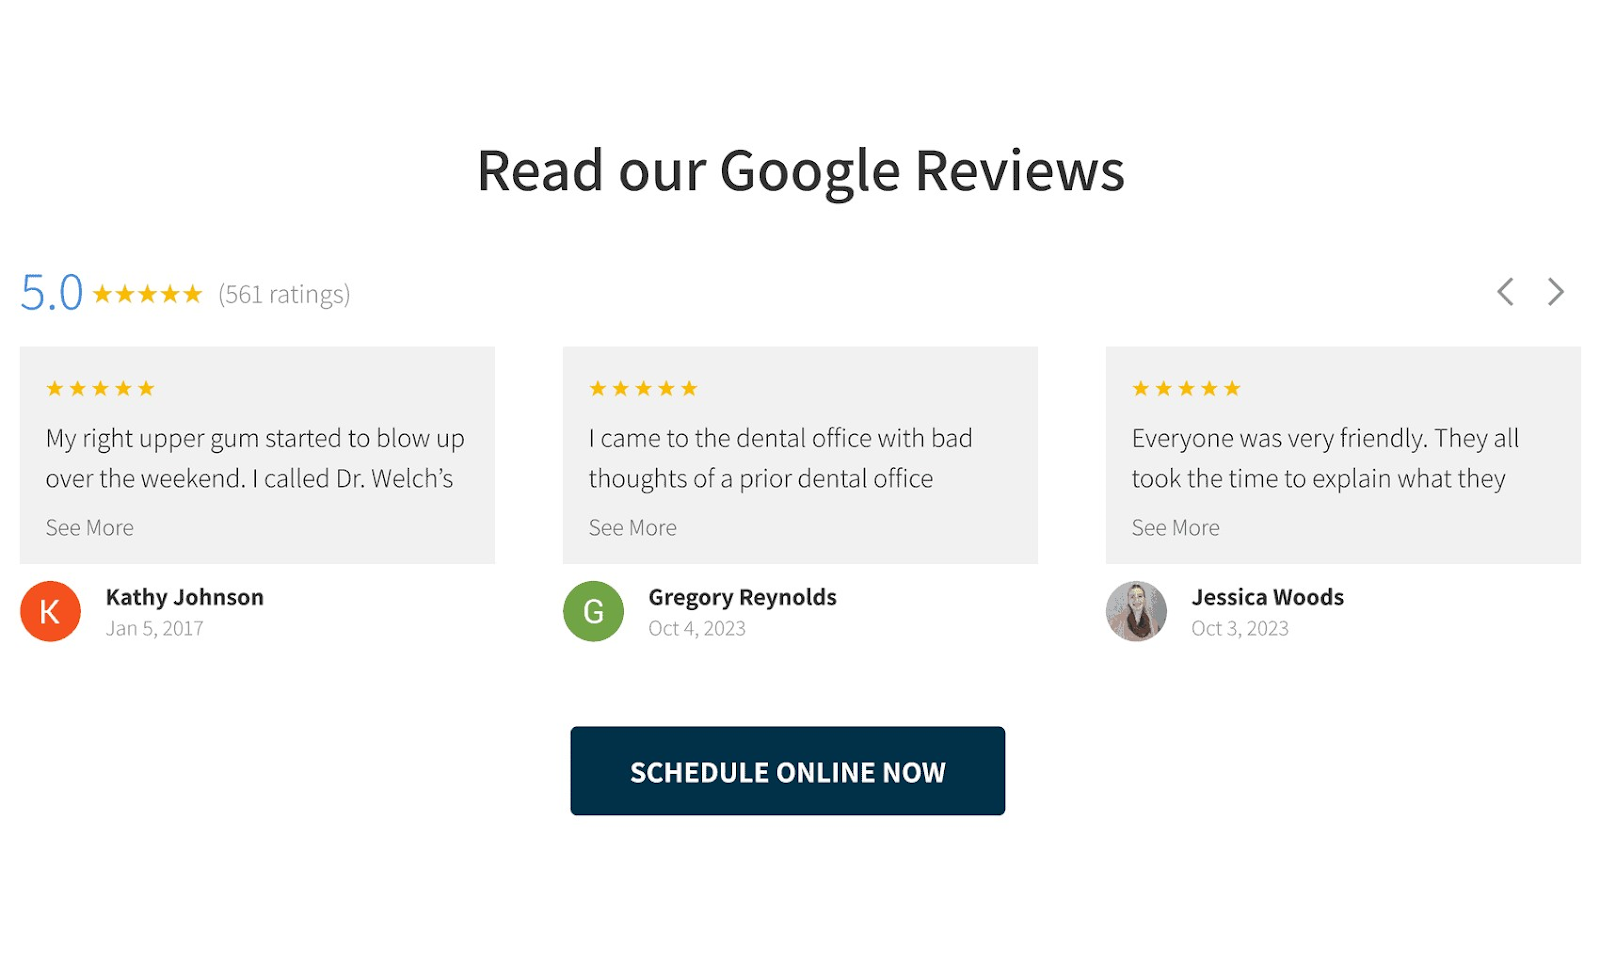 "Read our Google Reviews" section of Dallas Dental homepage